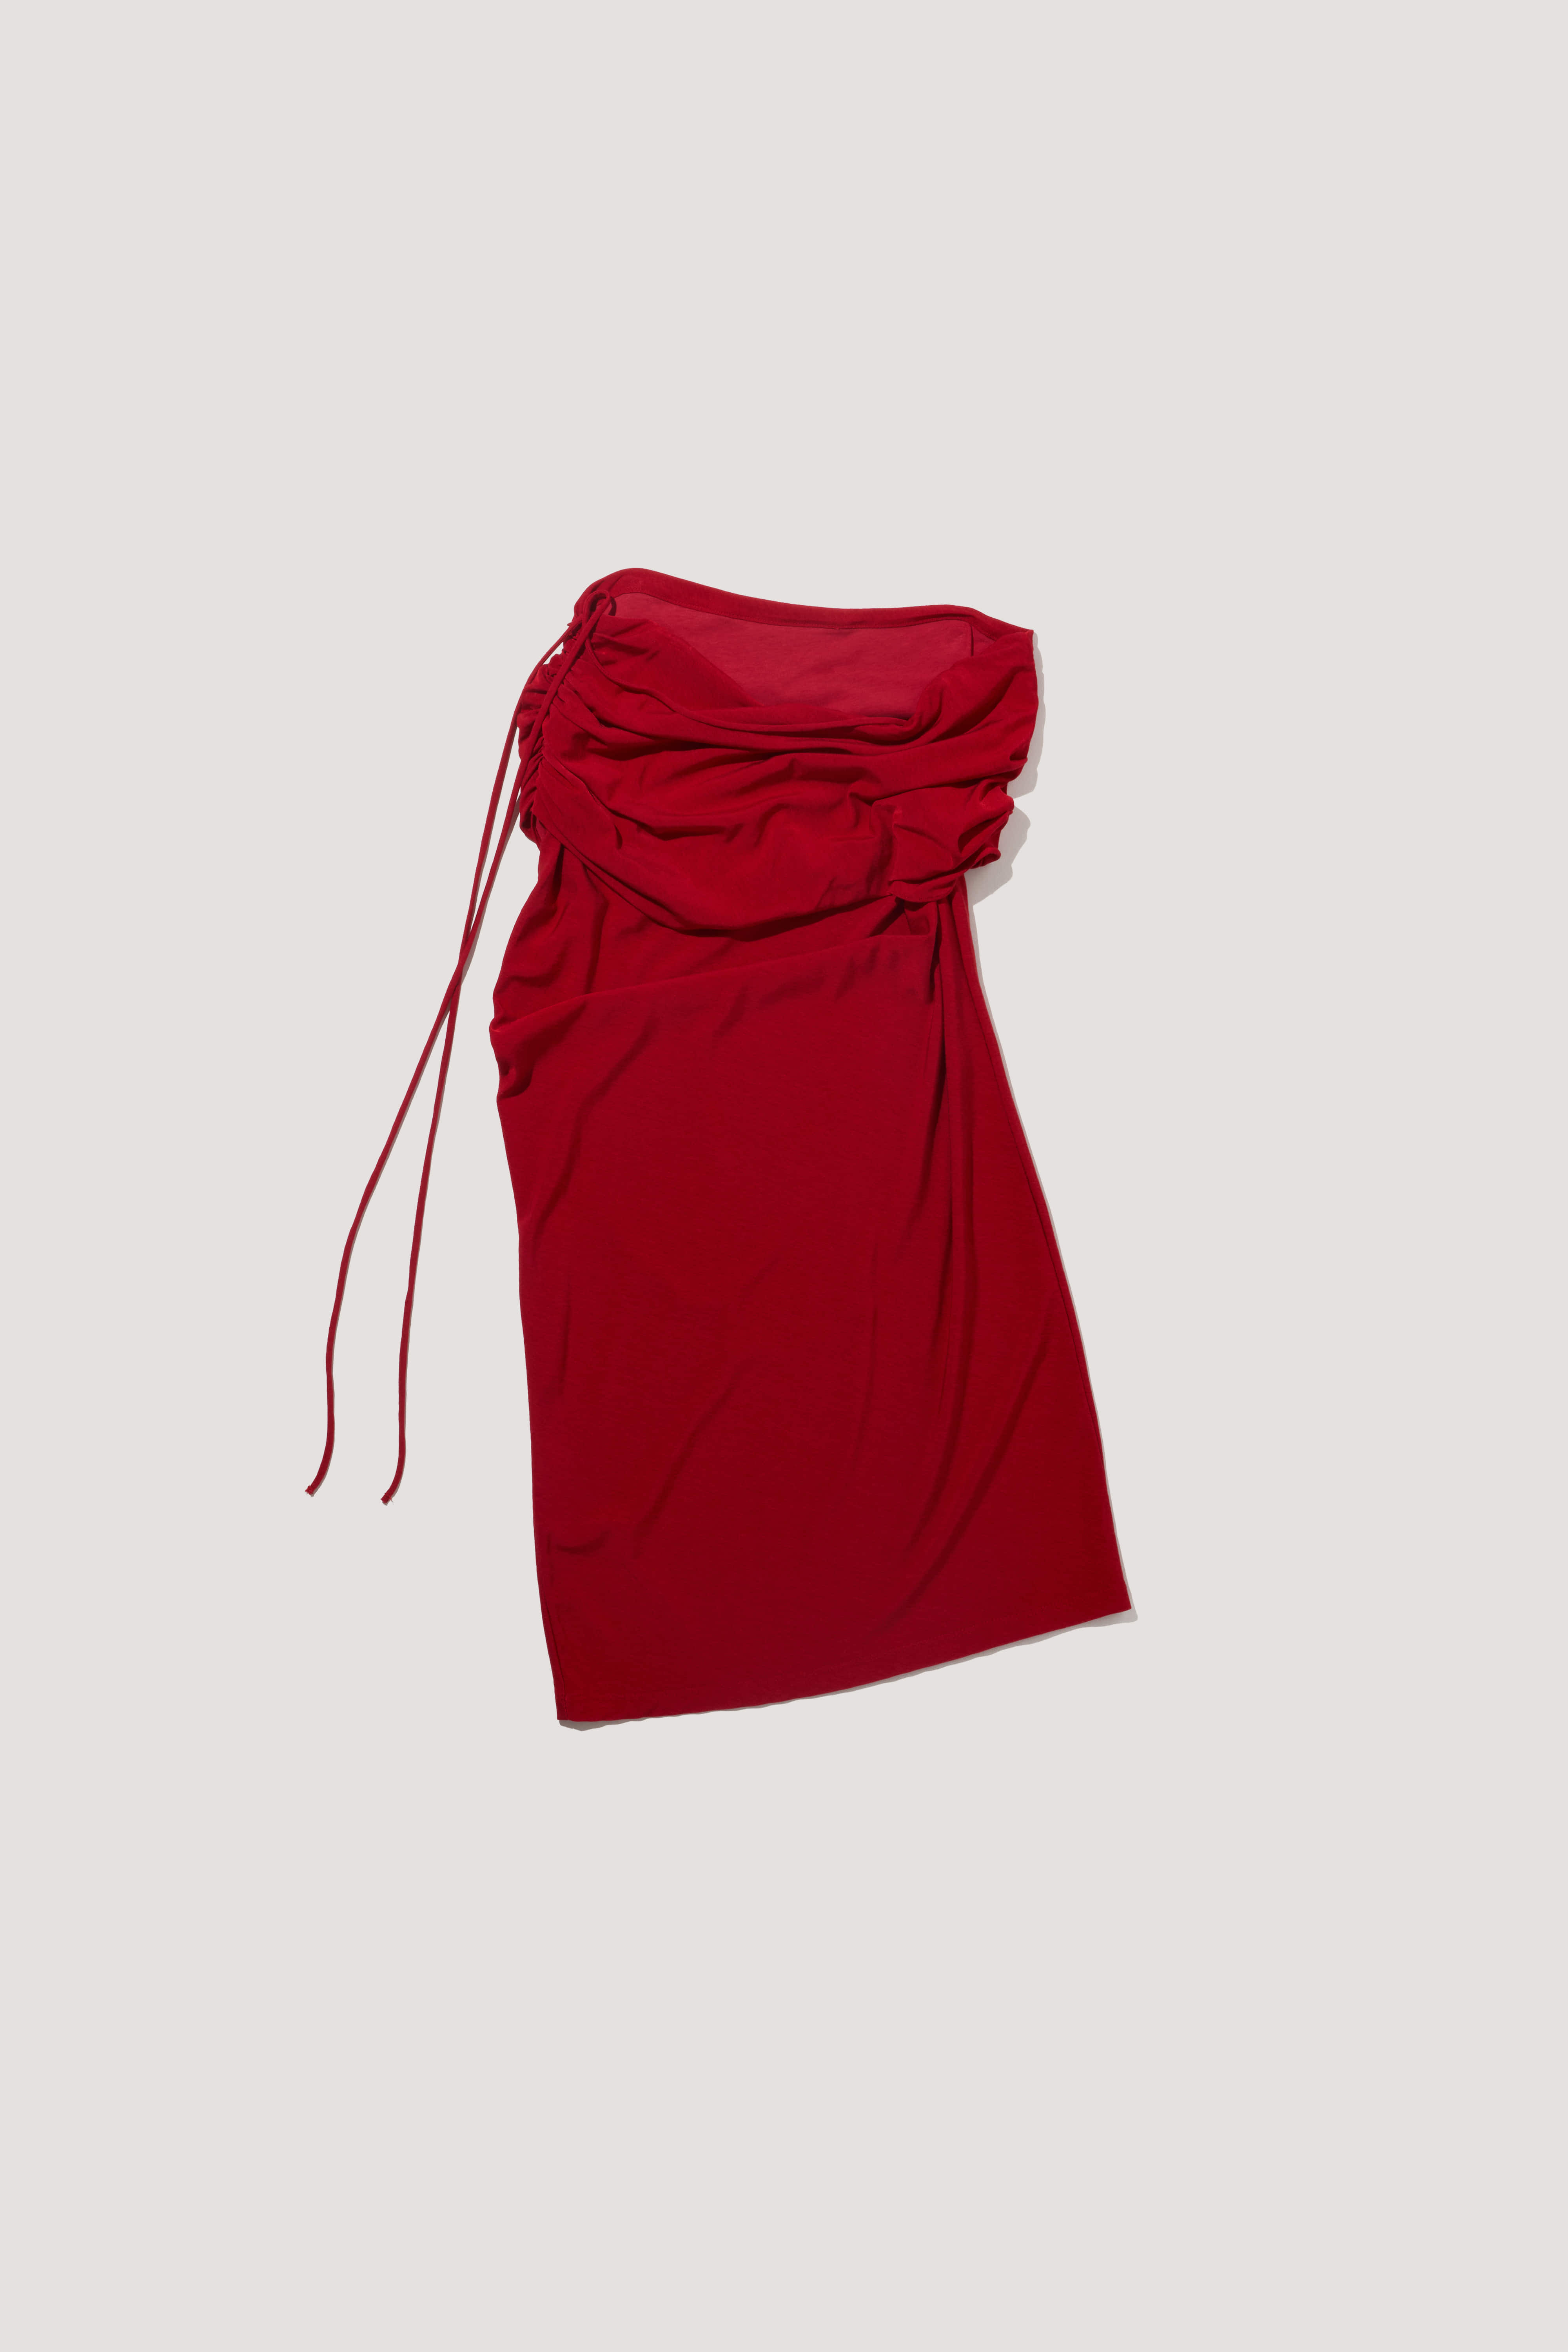 Double-Layered Shirring Skirt [red]